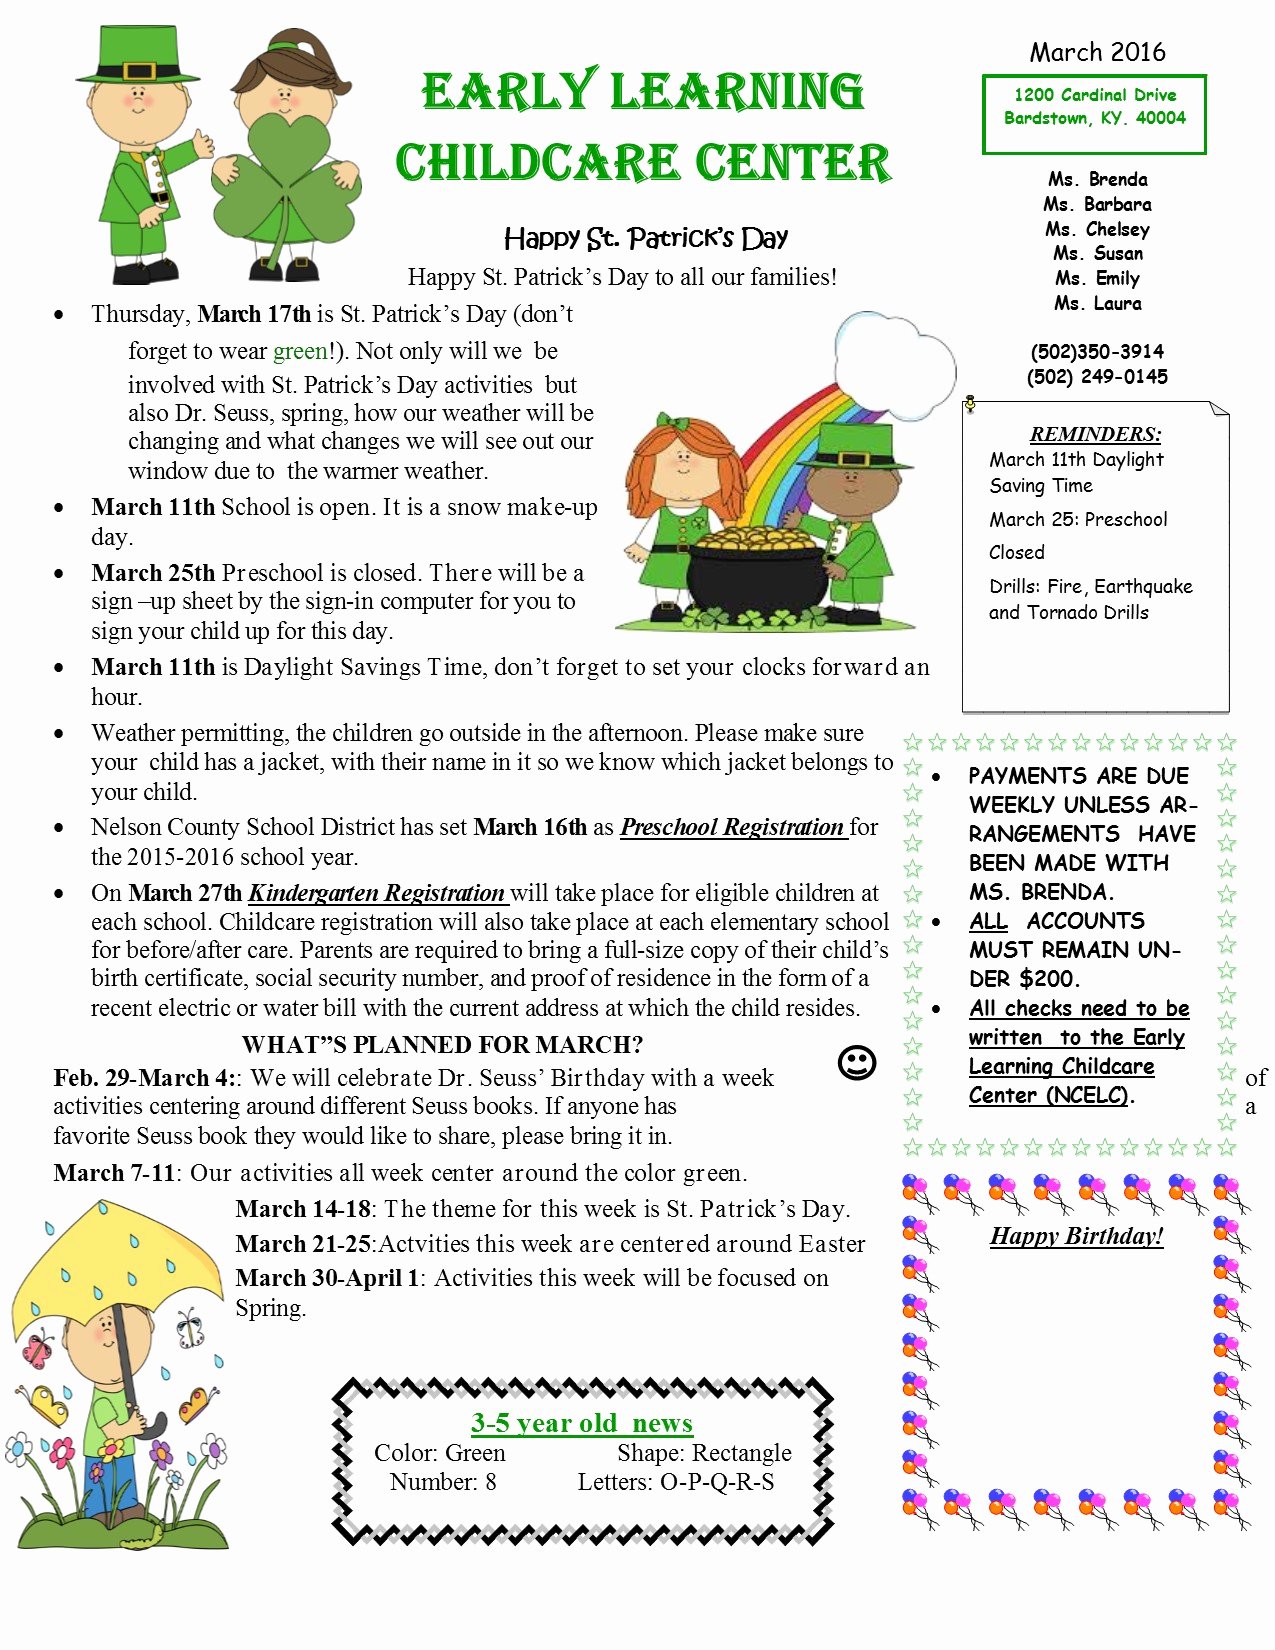 Child Care Newsletter Template Lovely March Early Learning Childcare Center Newsletter 2016